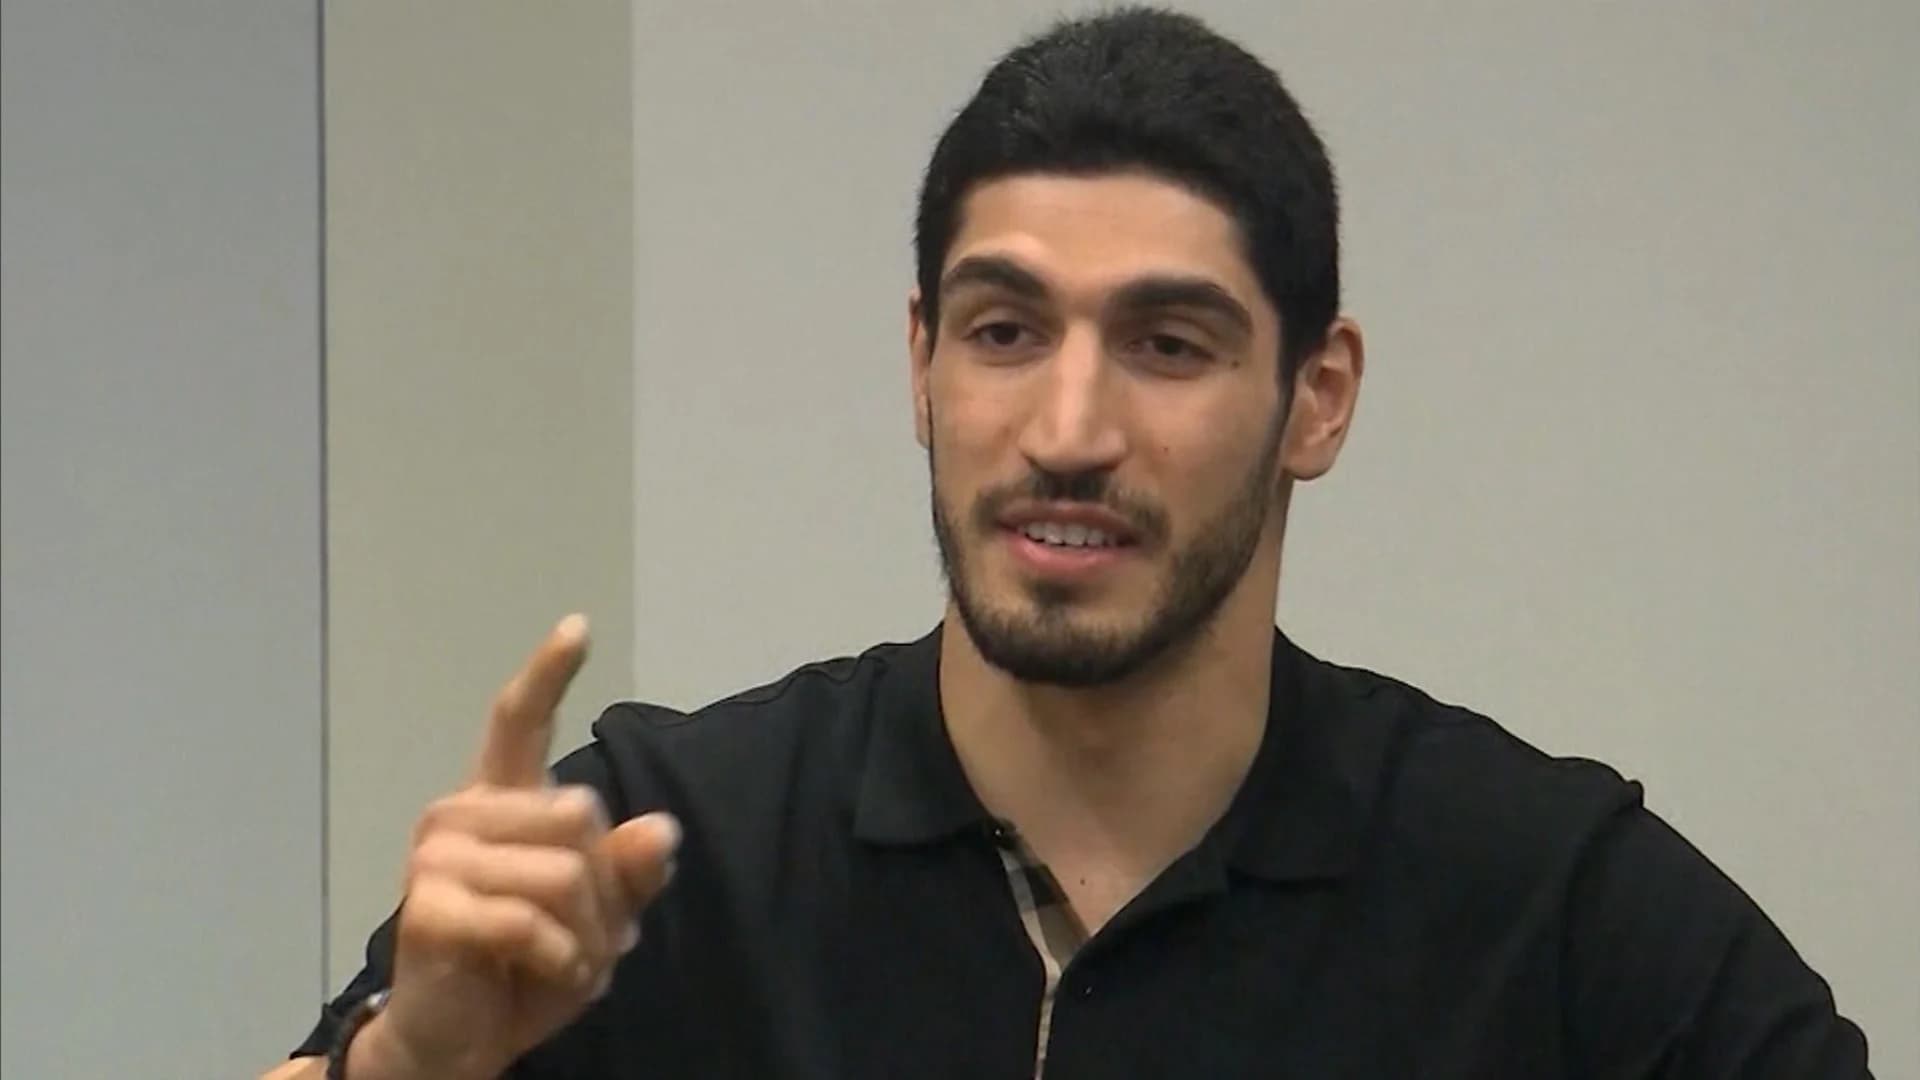 New York Knicks player faces prison in home country of Turkey